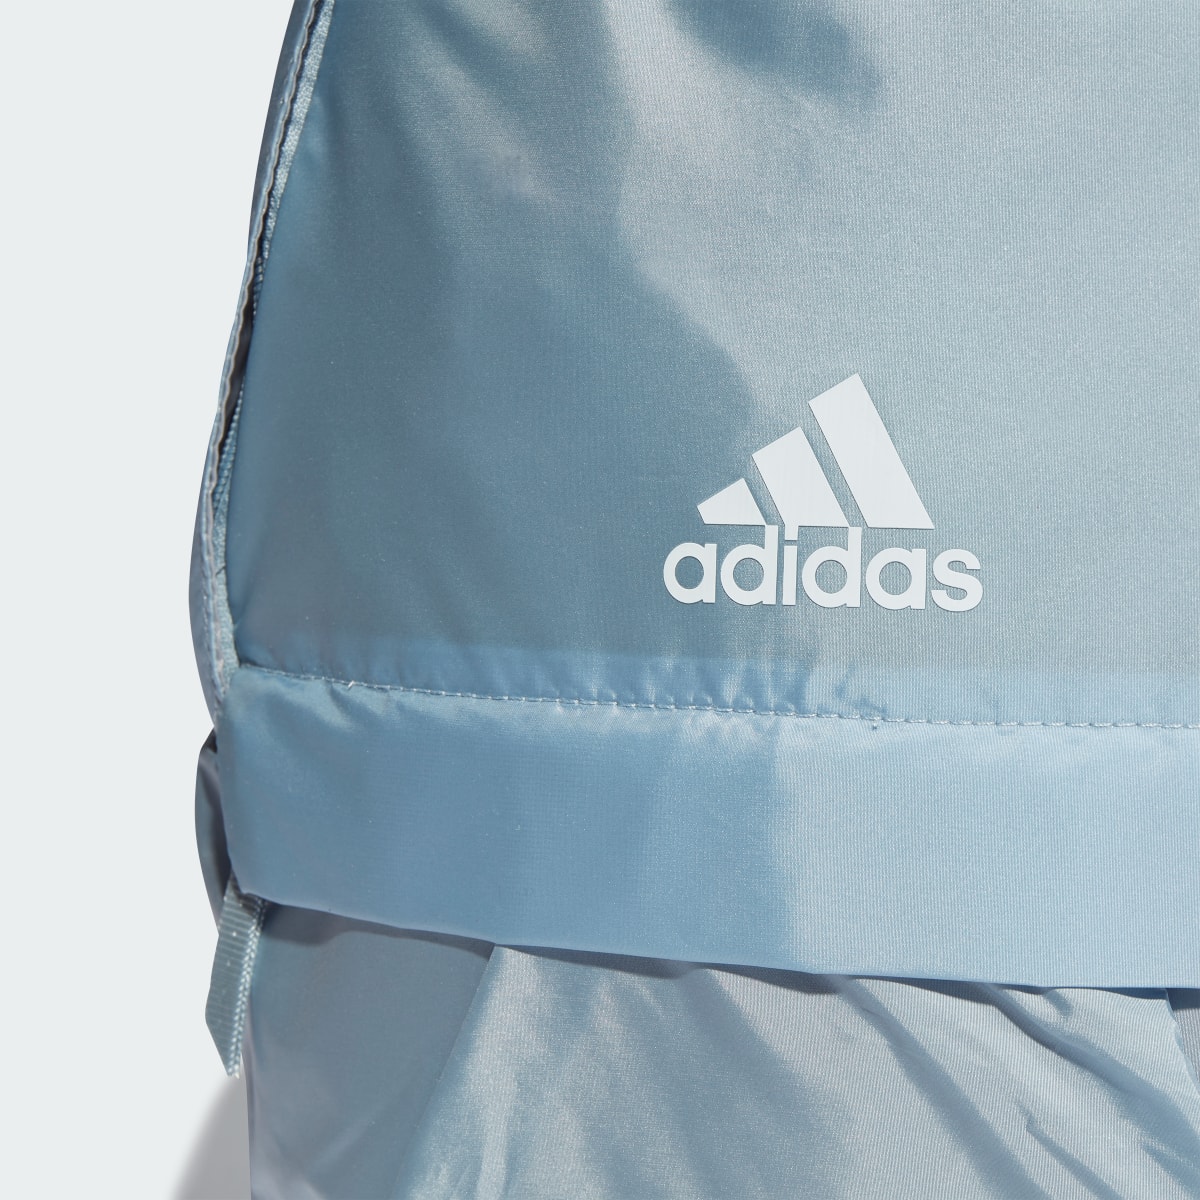 Adidas Classic Gen Z Backpack. 6